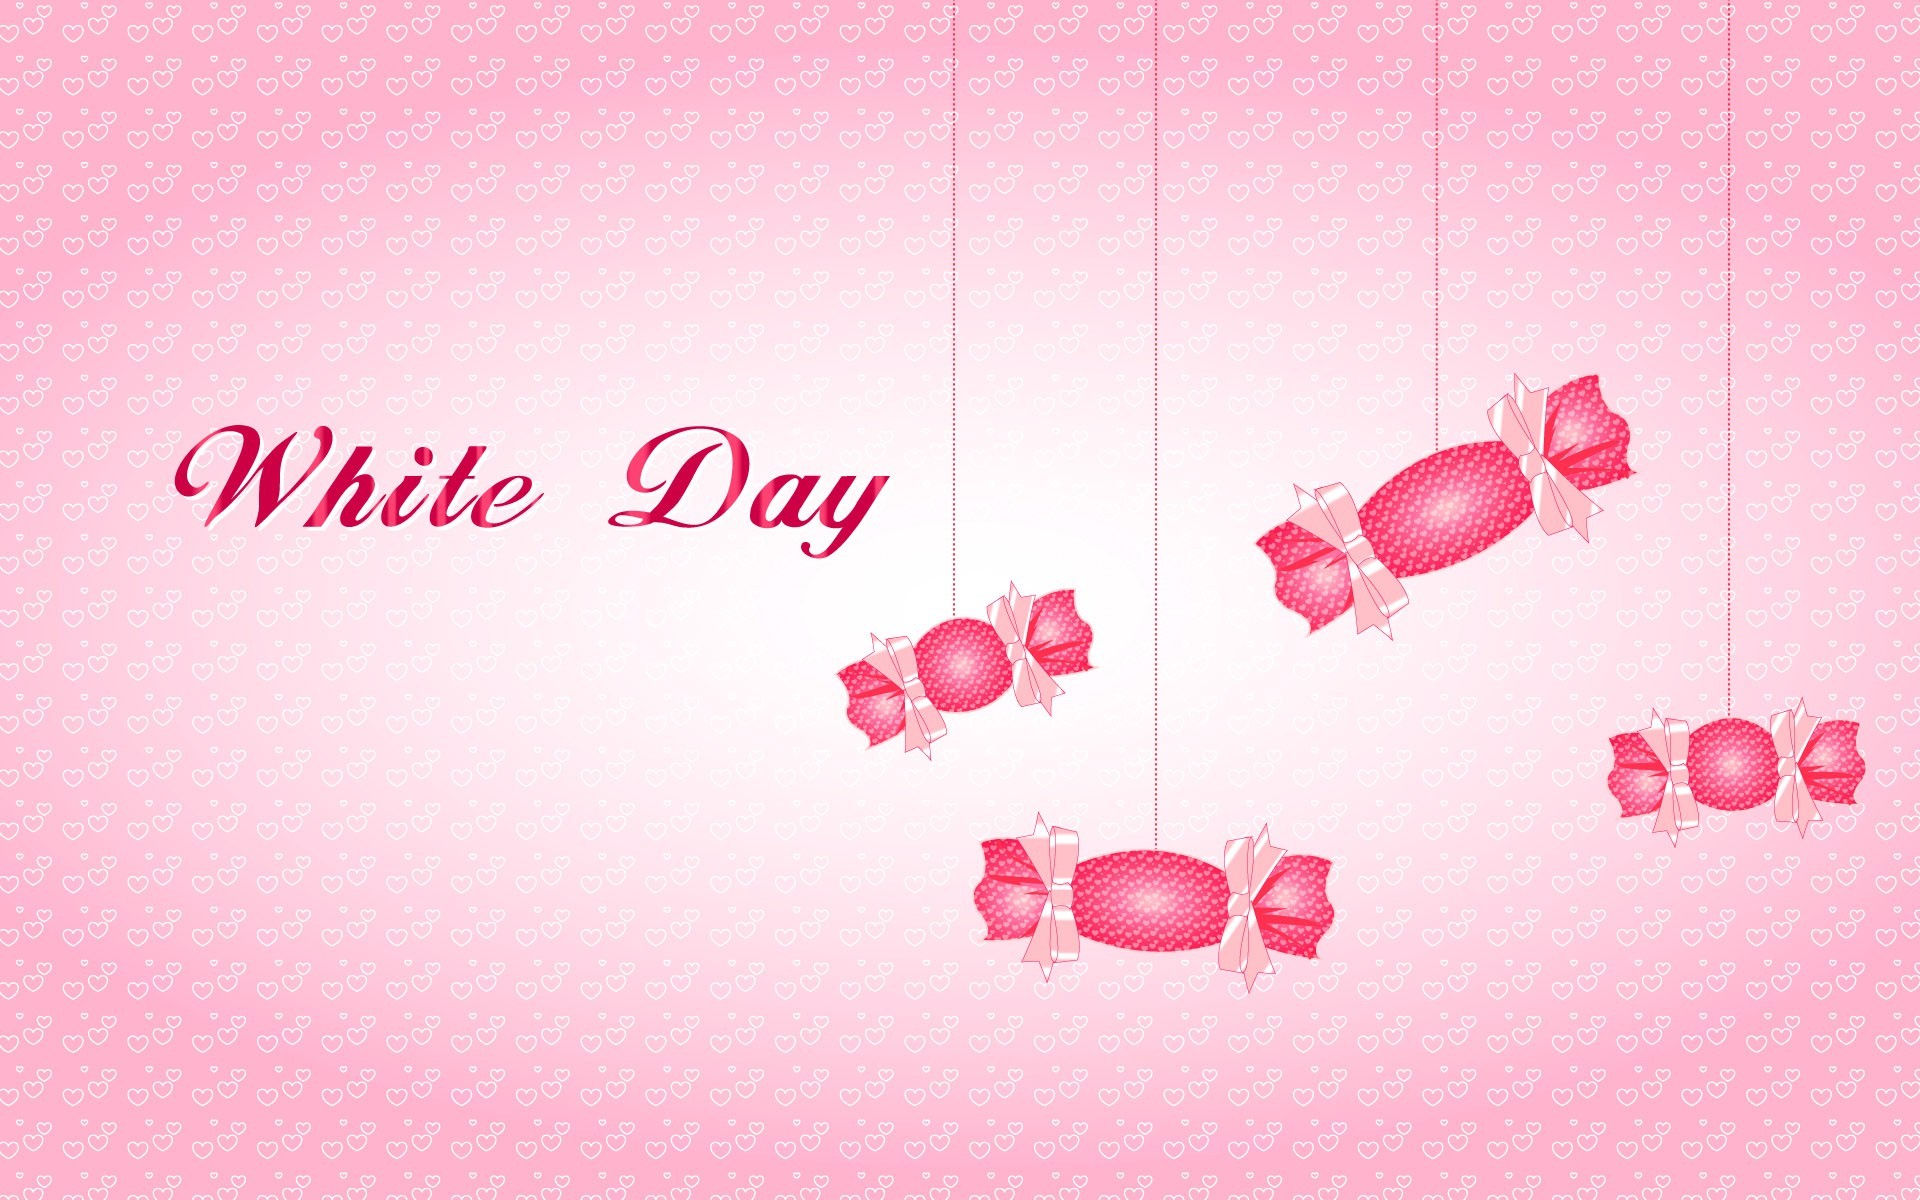 Best Moment for Affordable 3d Valentine Screensaver Free Download and valentines wallpaper hd